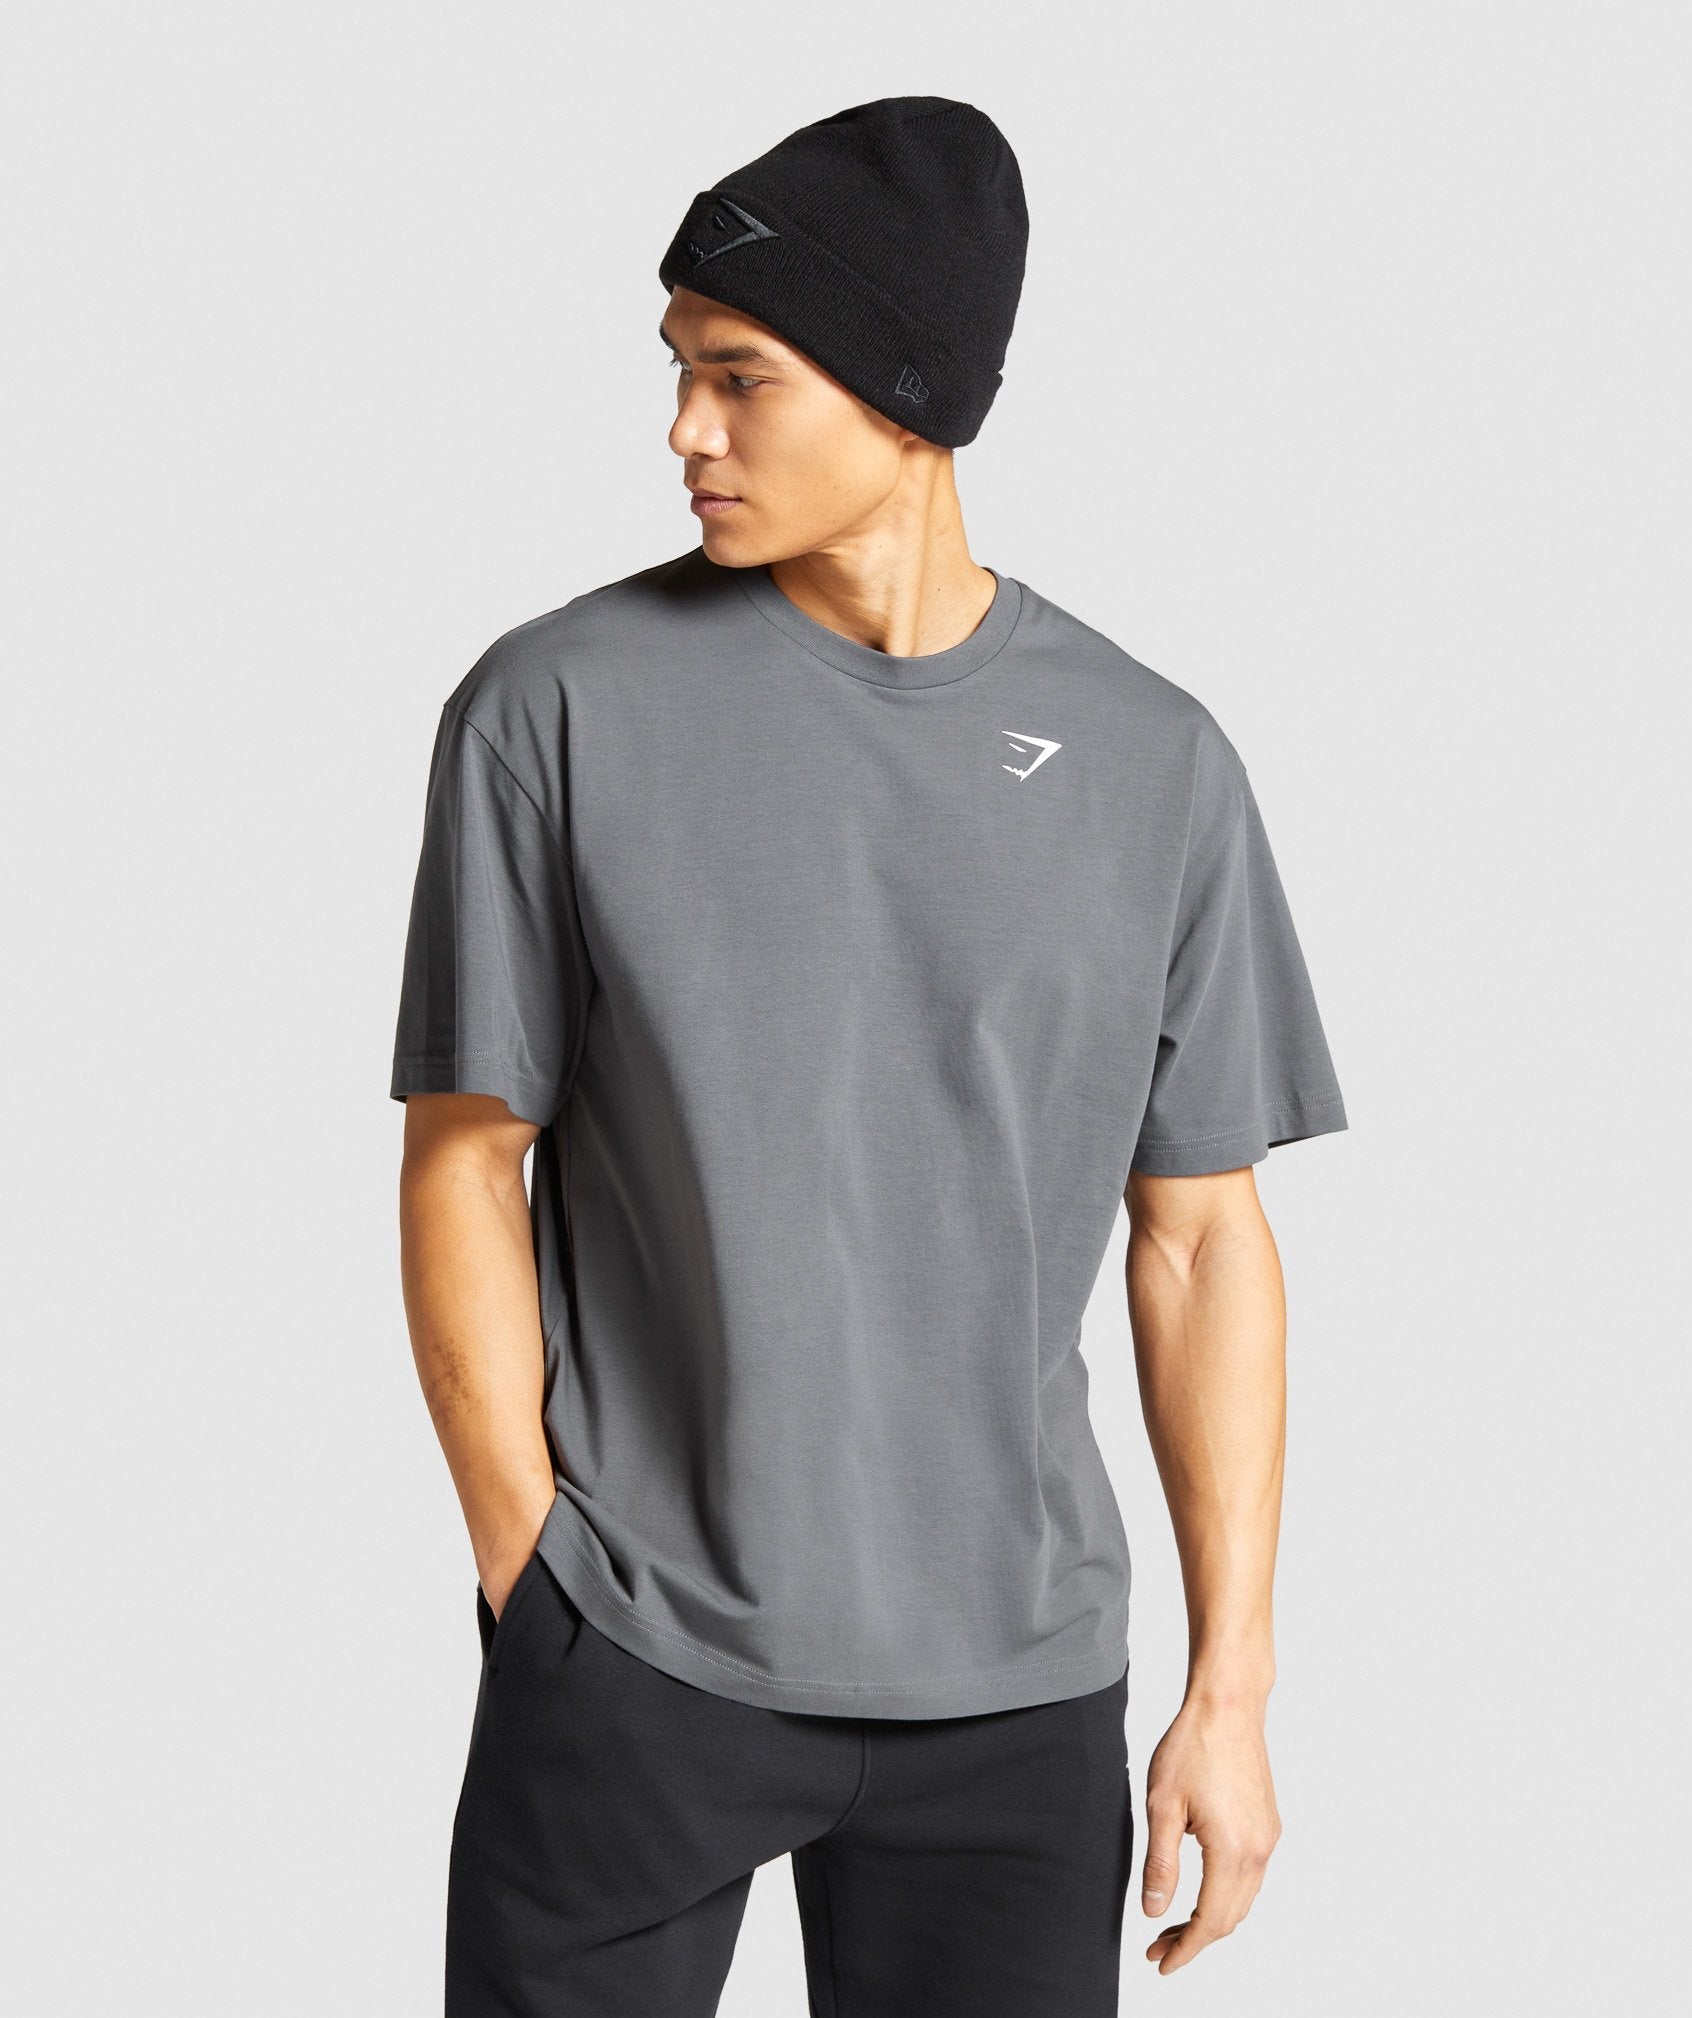 Essential Oversized T-Shirt in Charcoal - view 1